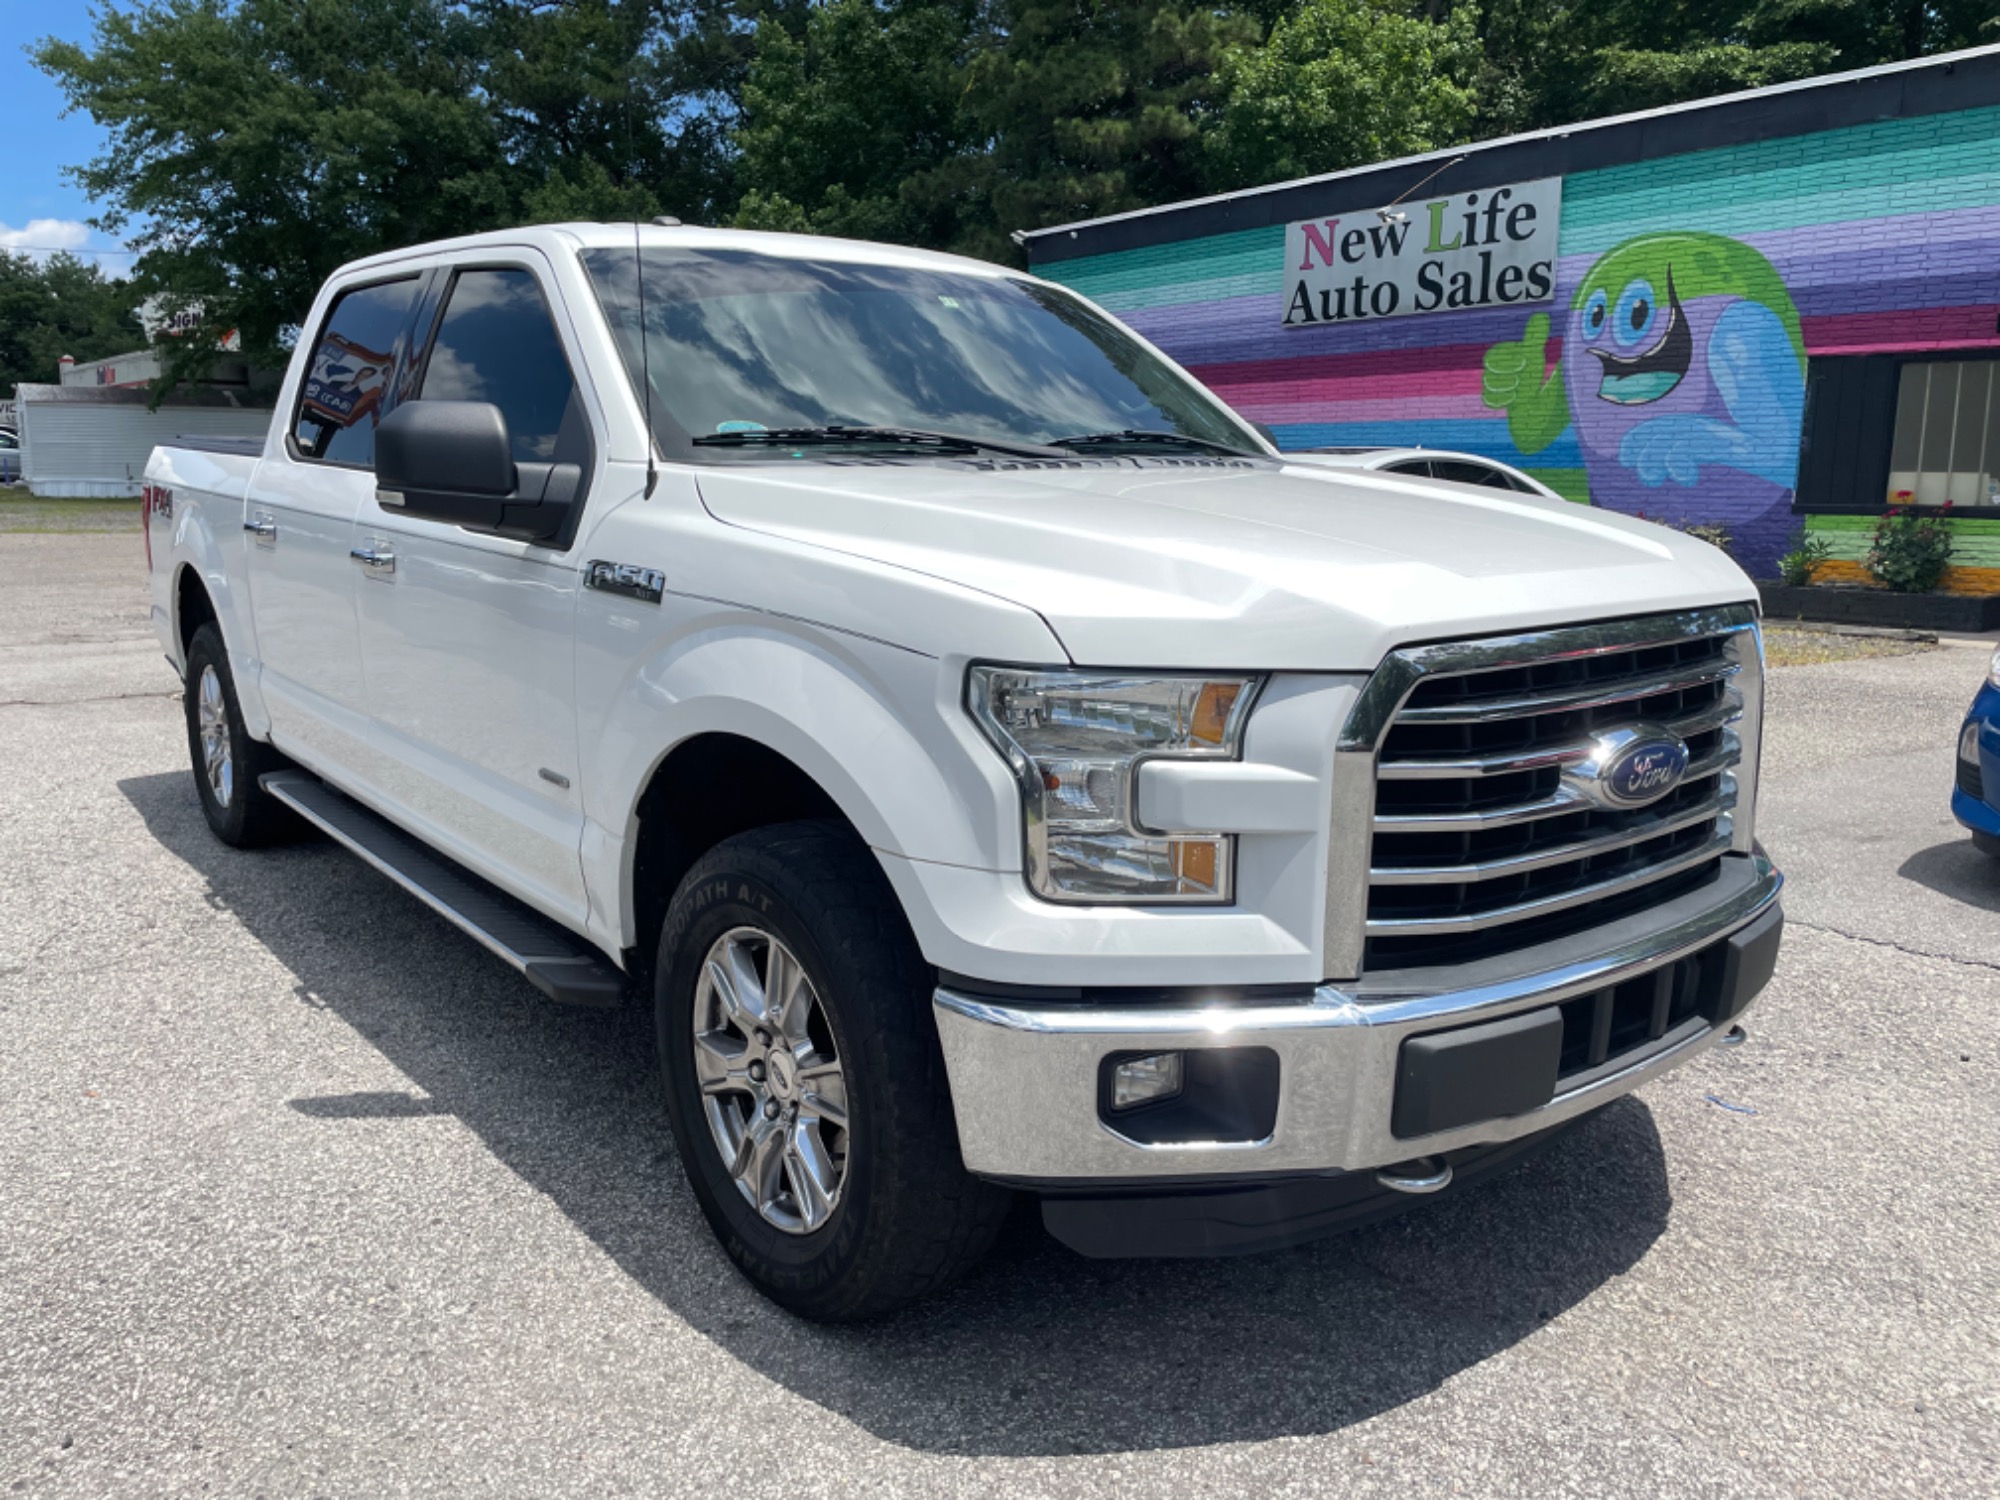 photo of 2016 FORD F-150 XLT SUPERCREW - FX4 OFF ROAD! Local Trade-in!!